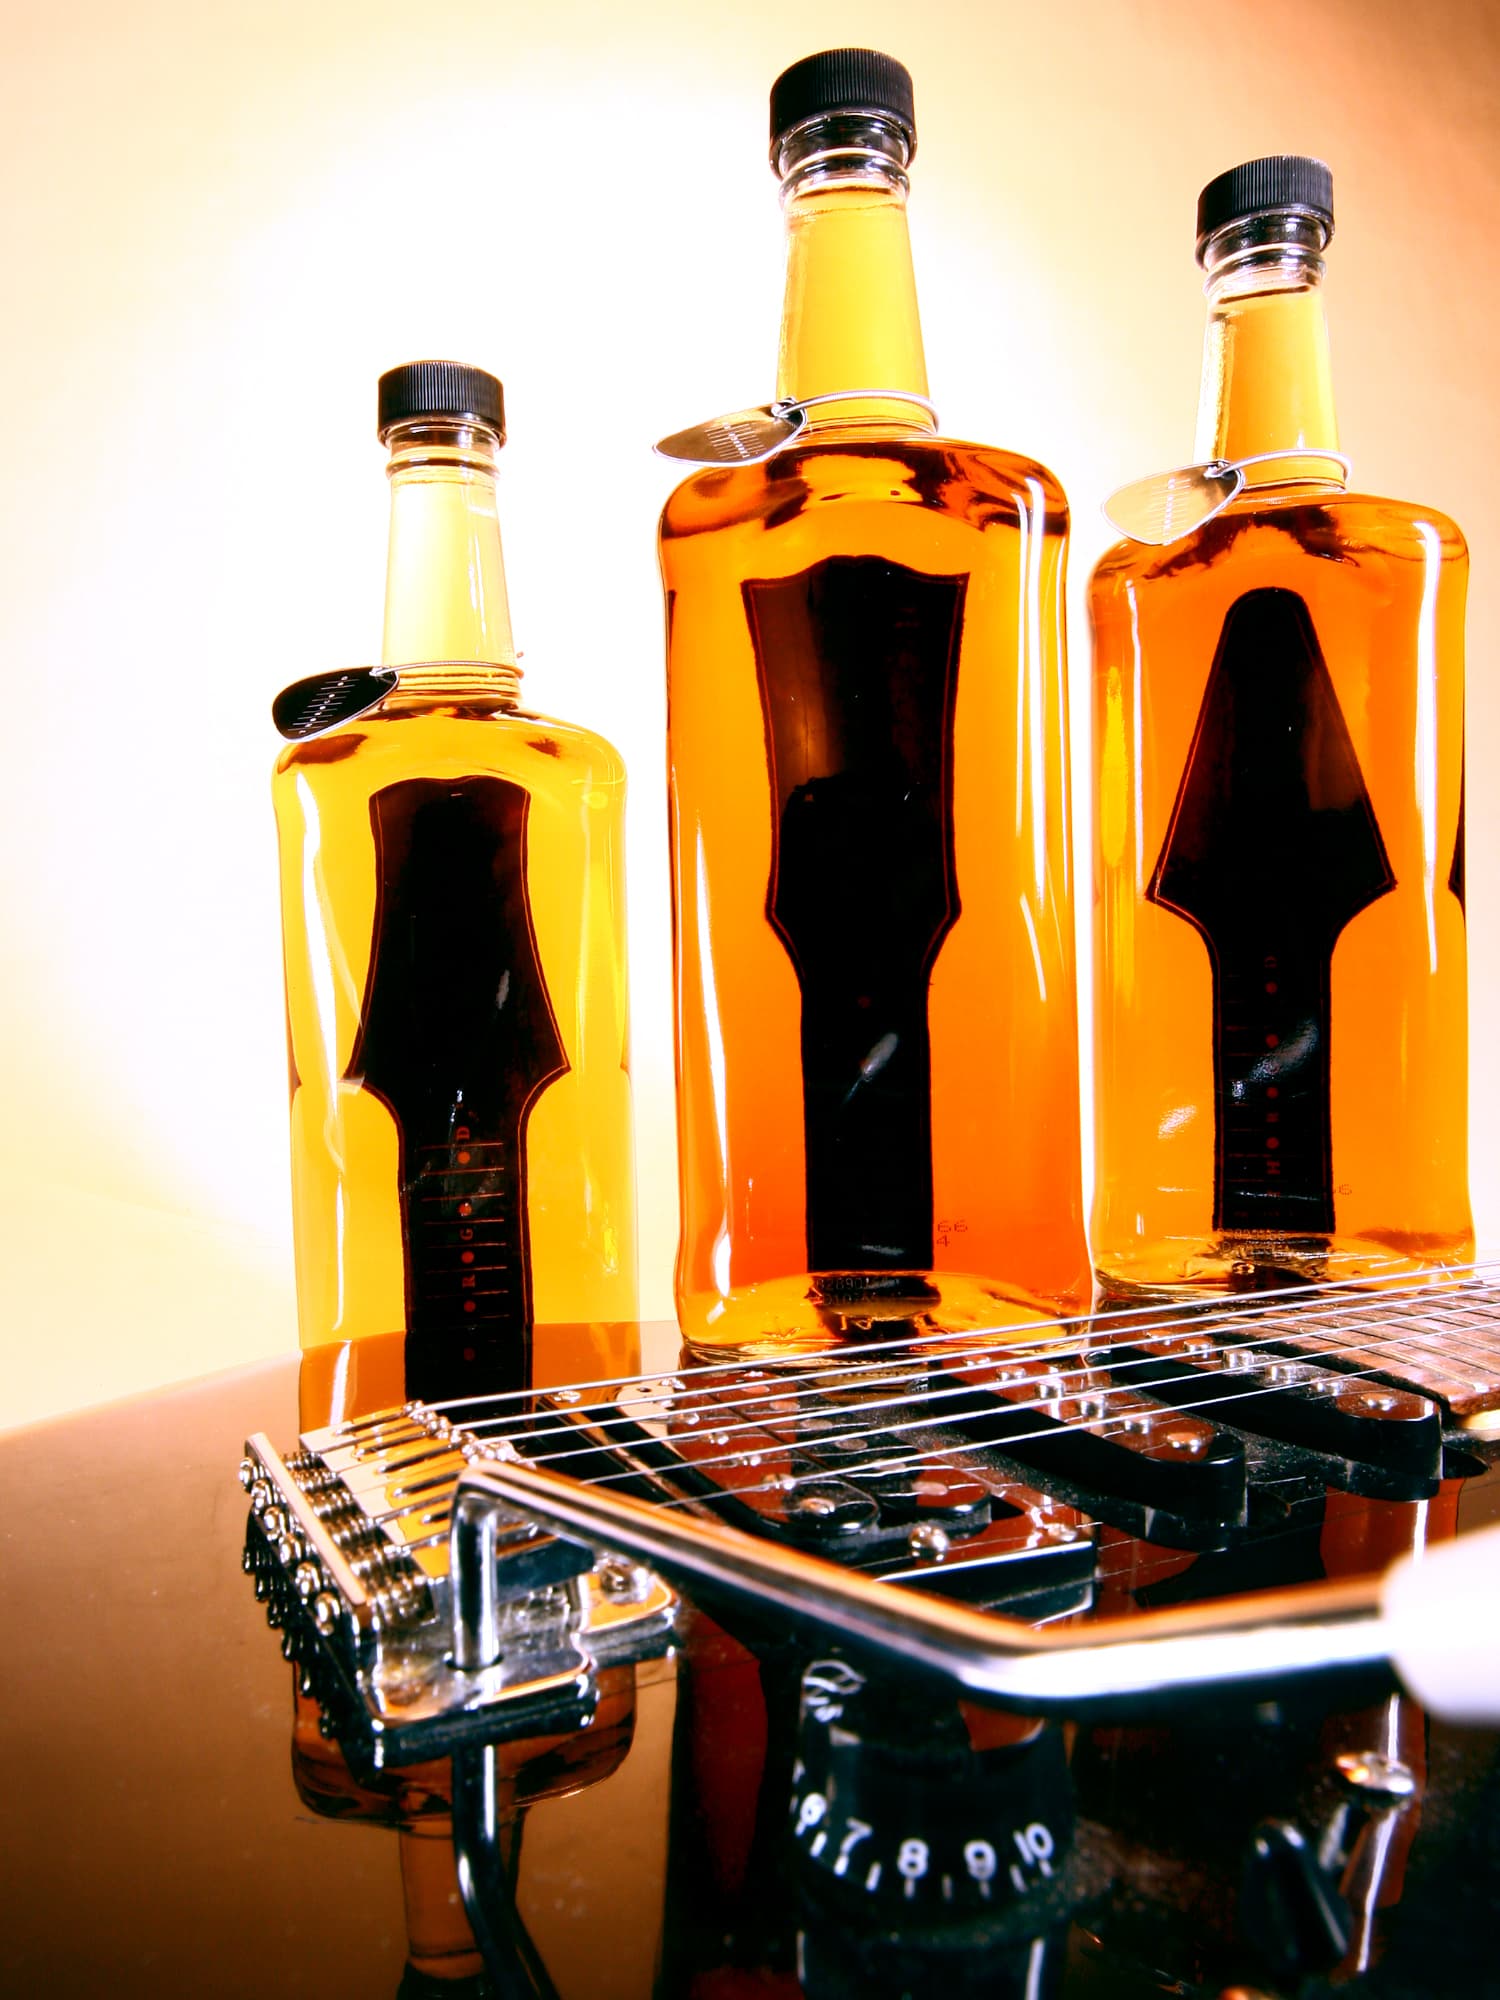 A photo of 3 bottles of whiskey and a guitar